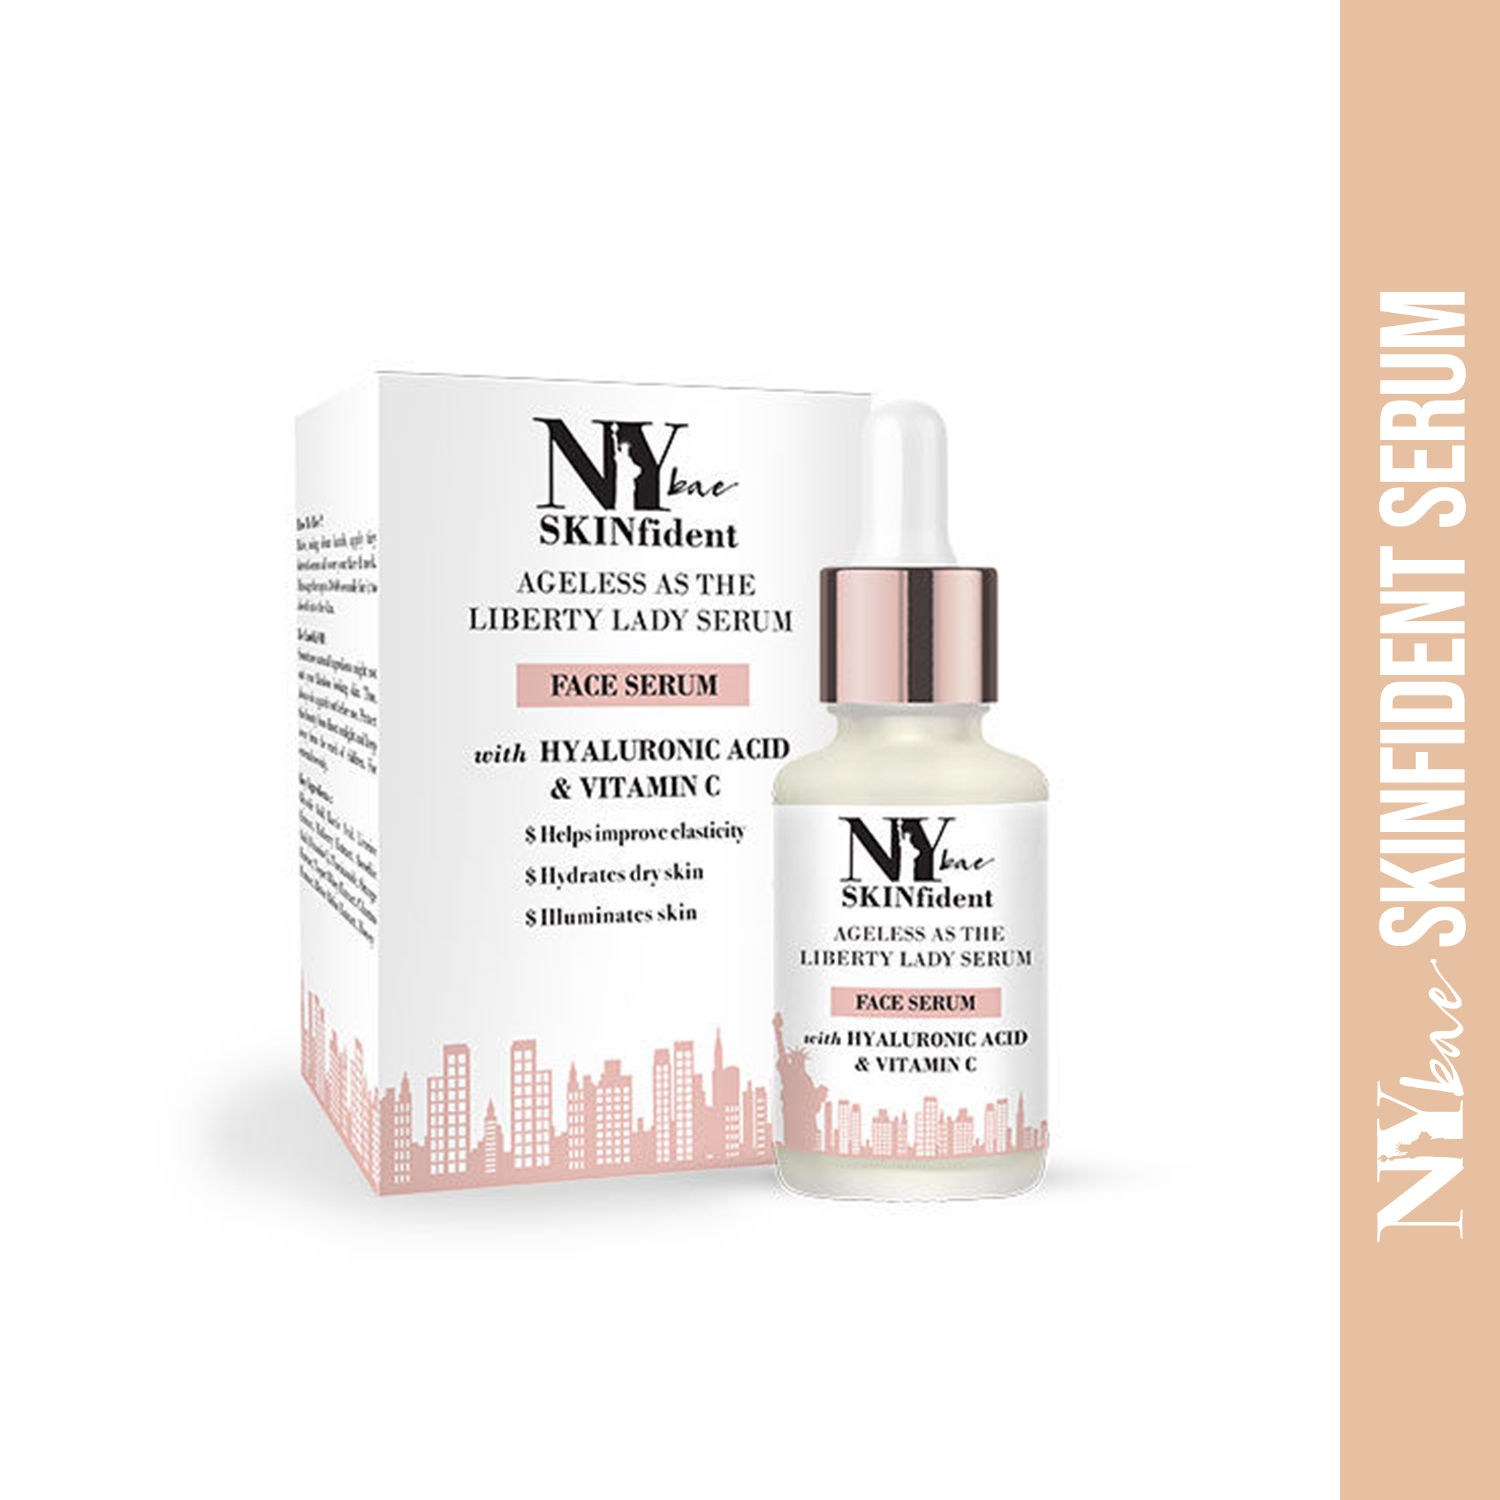 Buy NY Bae SKINfident Ageless As The Liberty Lady Face Serum with Hyaluronic Acid & Vitamin C (30 ml) - Purplle